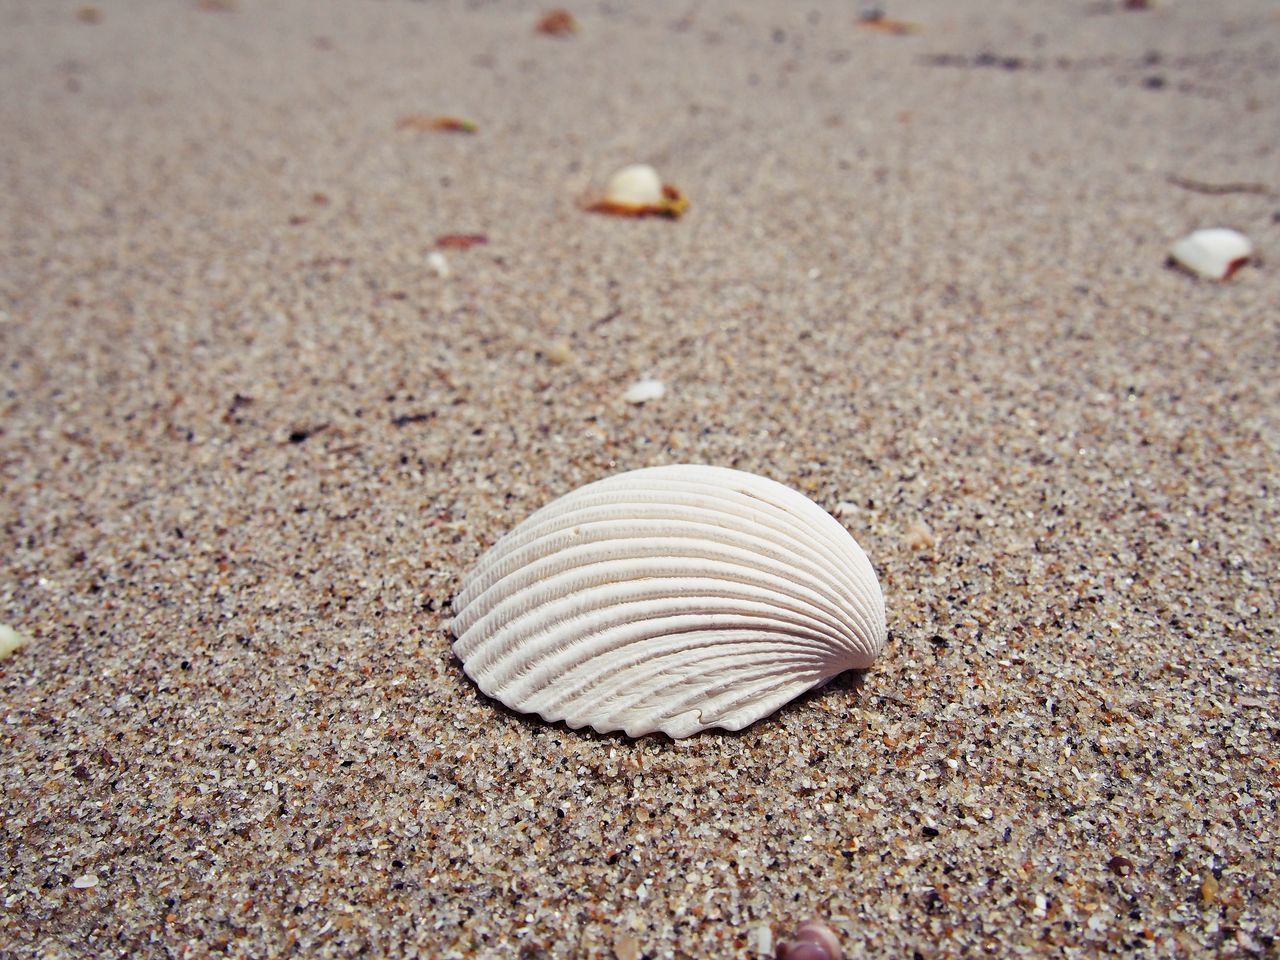 CLOSE-UP OF SHELL ON SAND